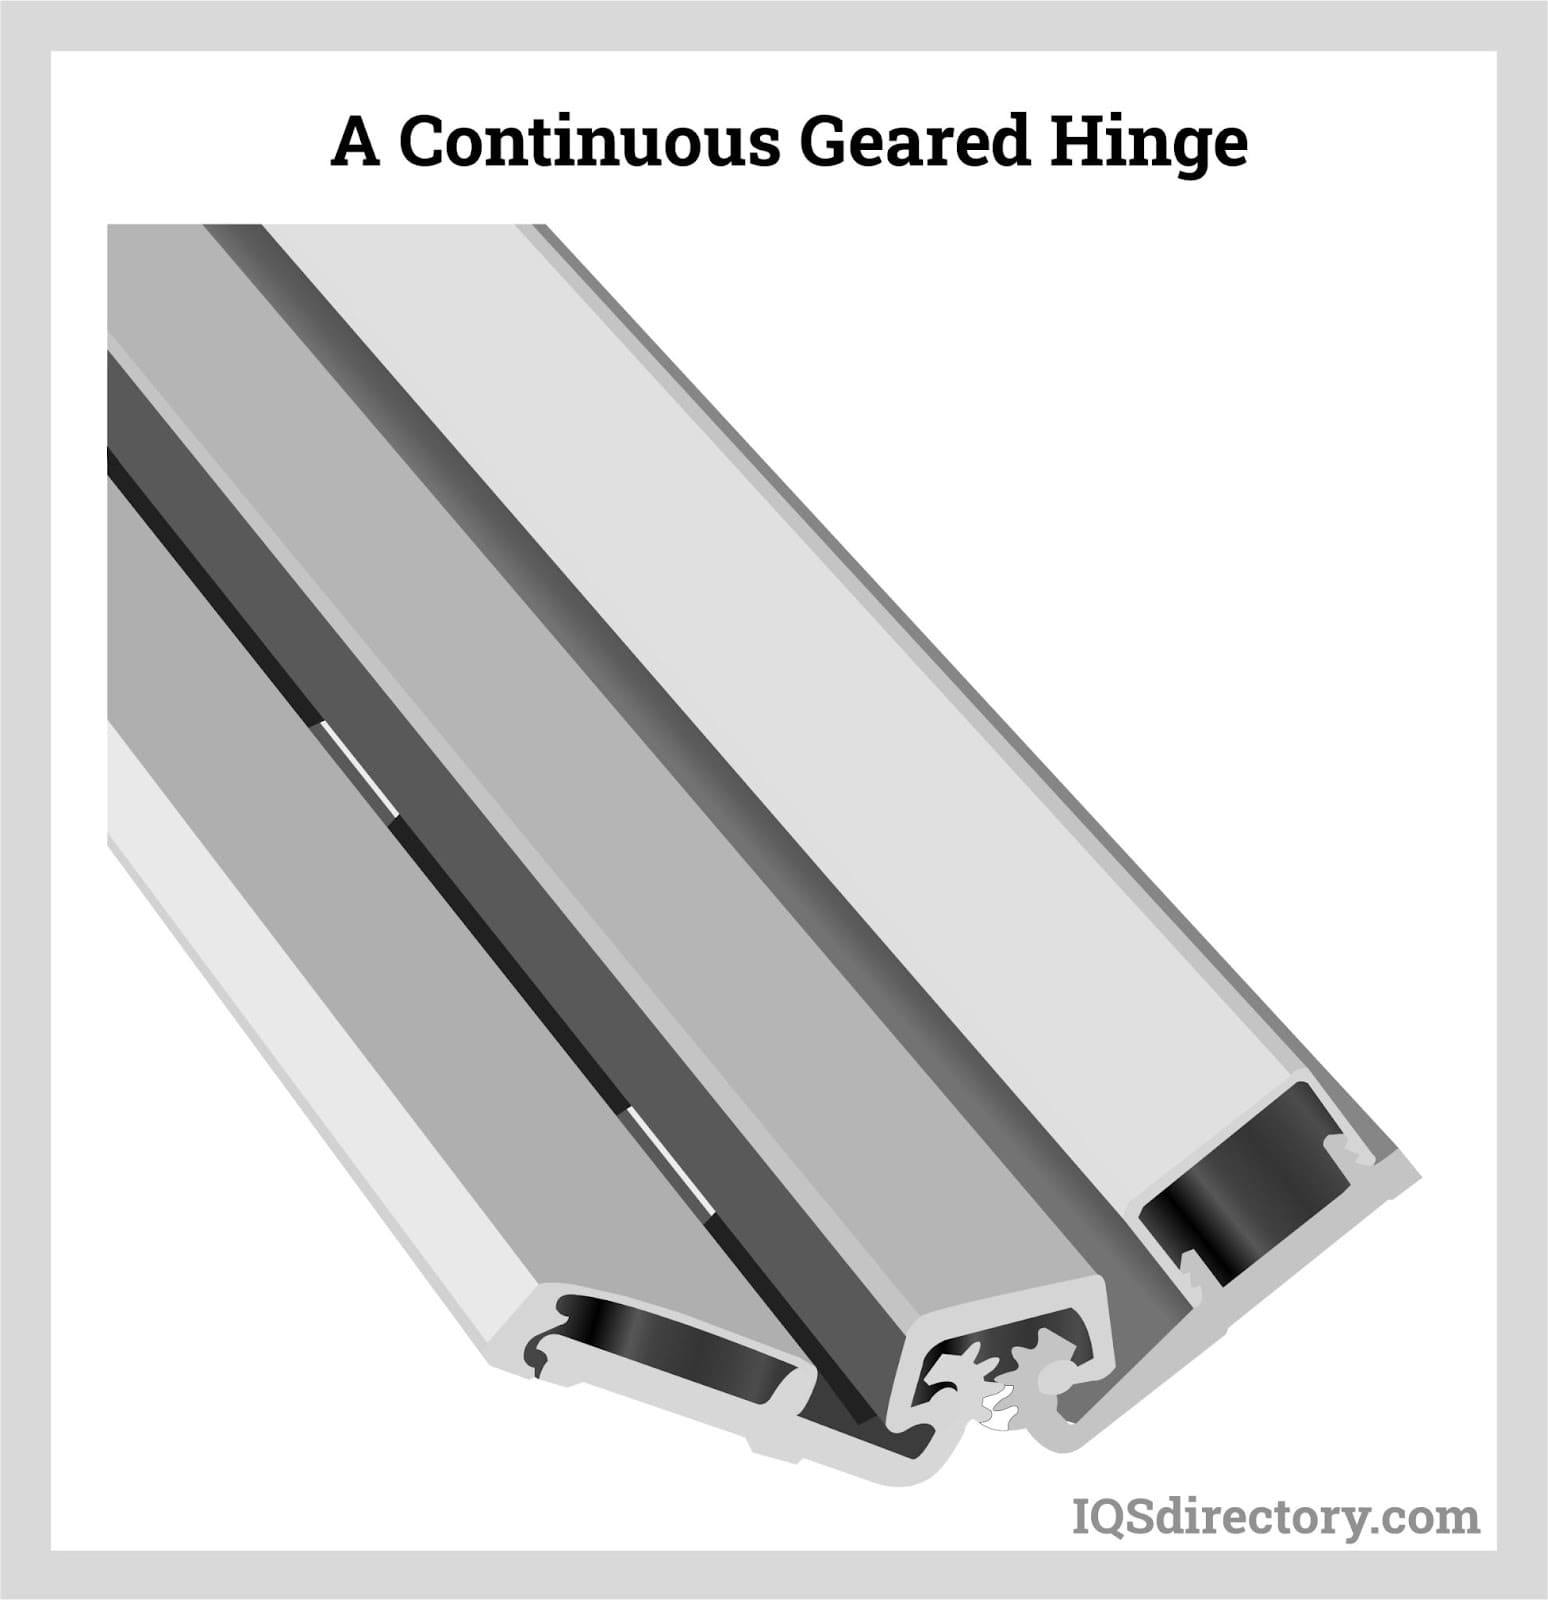 A Continuous Geared Hinge